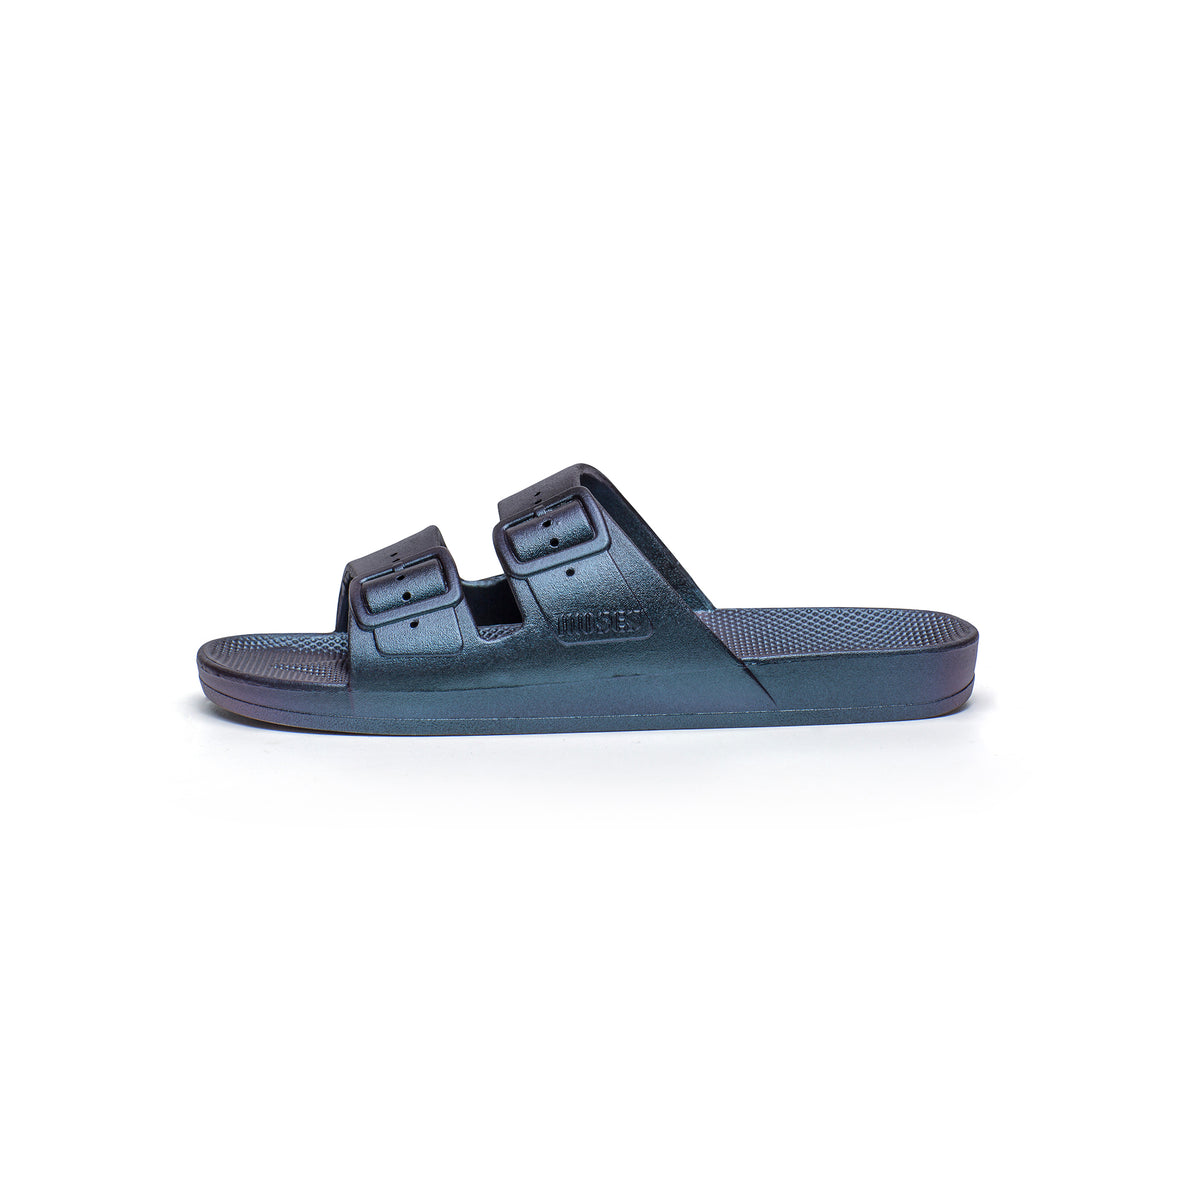 Parallel Culture Shoes and Fashion Online SLIDES FREEDOM MOSES FM METALLICS SLIDES TWILIGHT